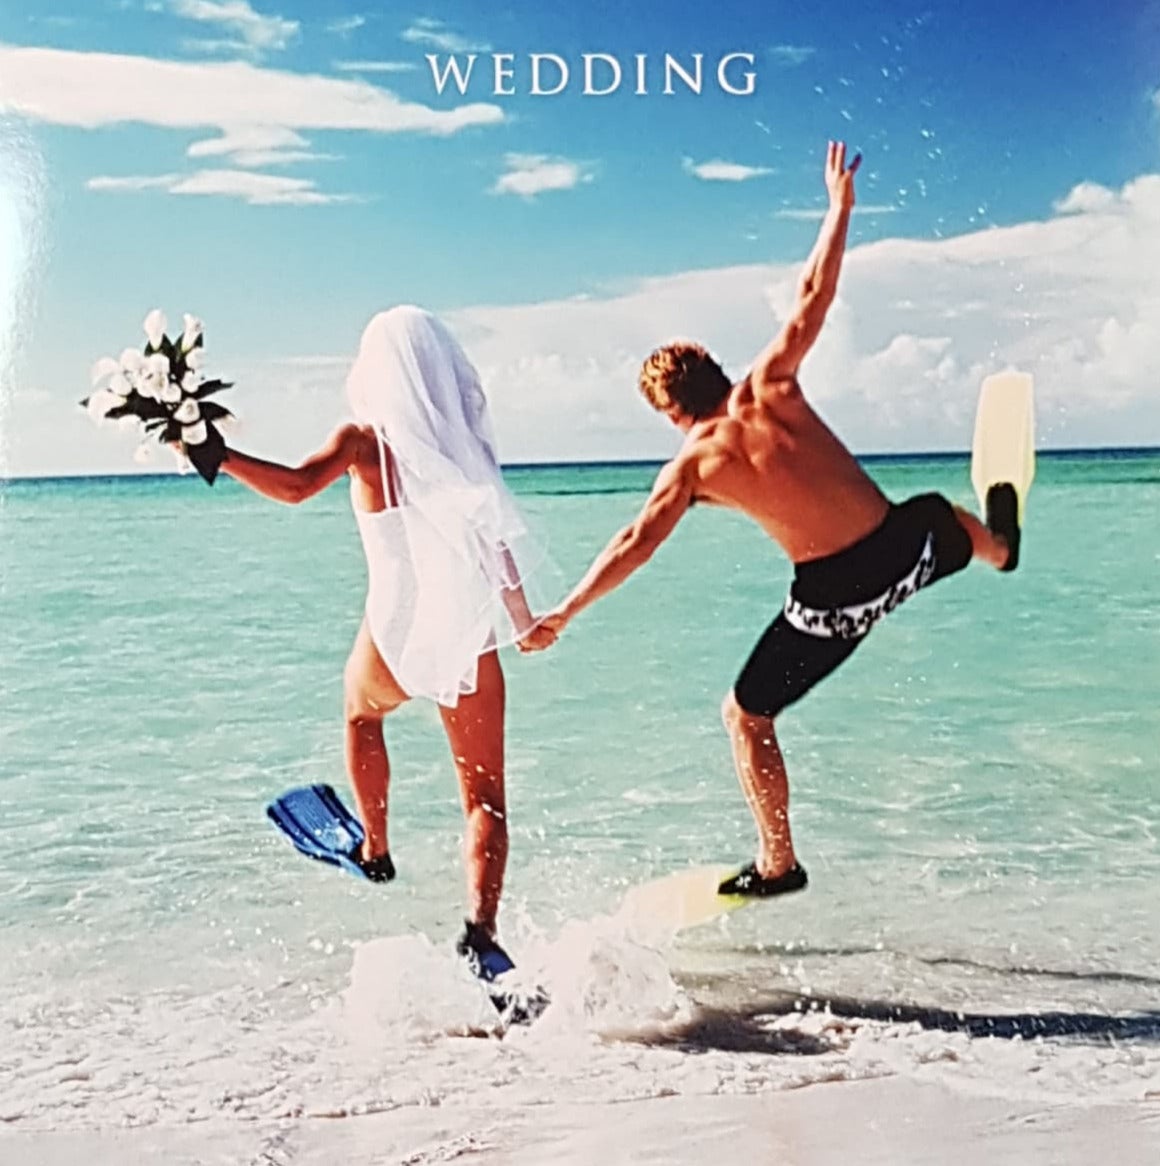 Wedding Card - General / A Married Couple In A Beach In Water